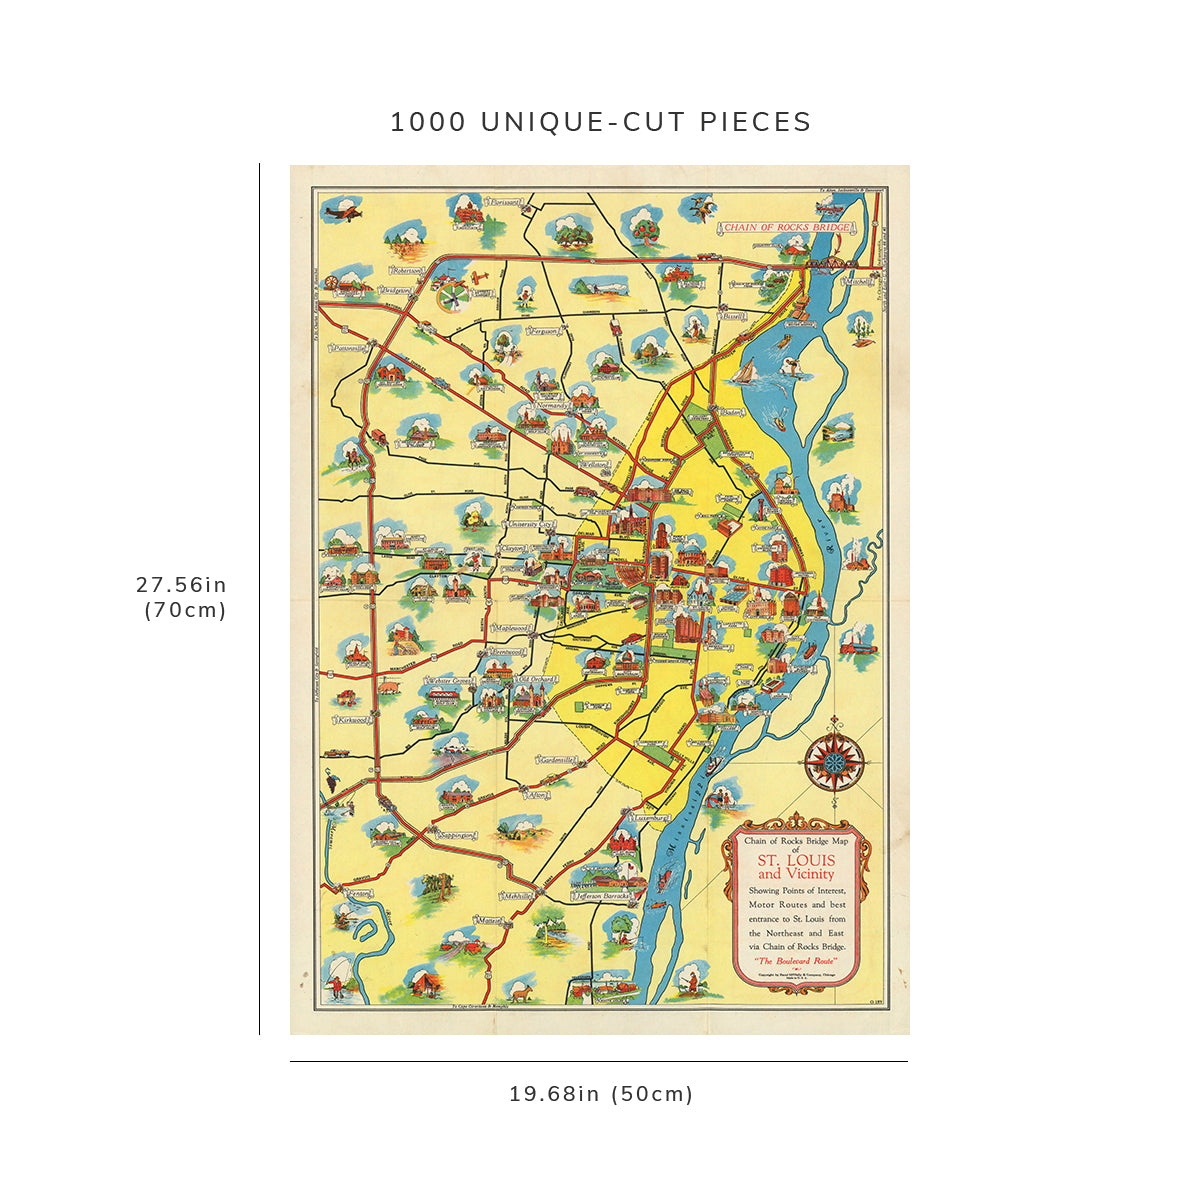 1000 piece puzzle - 1940 Map of Chain of Rocks Bridge of St. Louis and vicinity | Family Entertainment